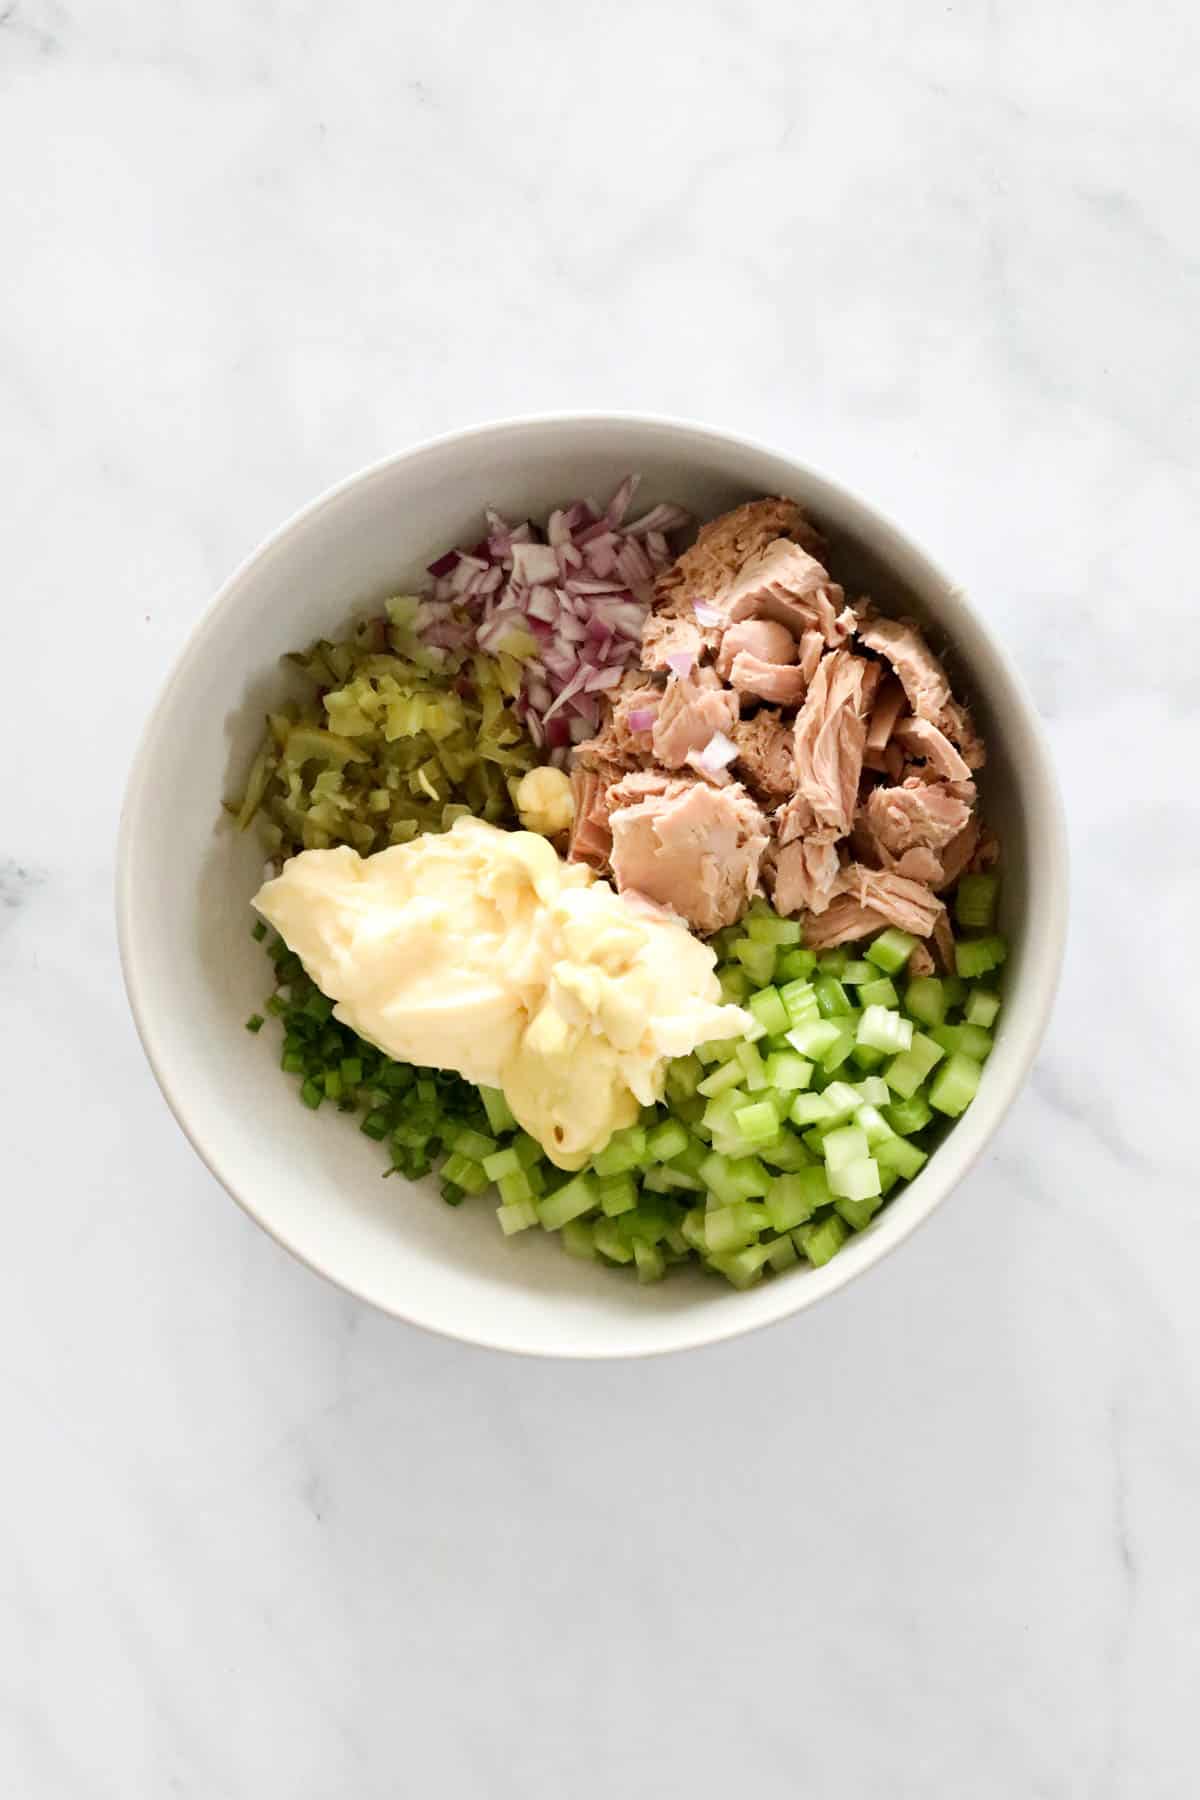 The ingredients for tuna salad in a mixing bowl with a dollop of mayo on top.